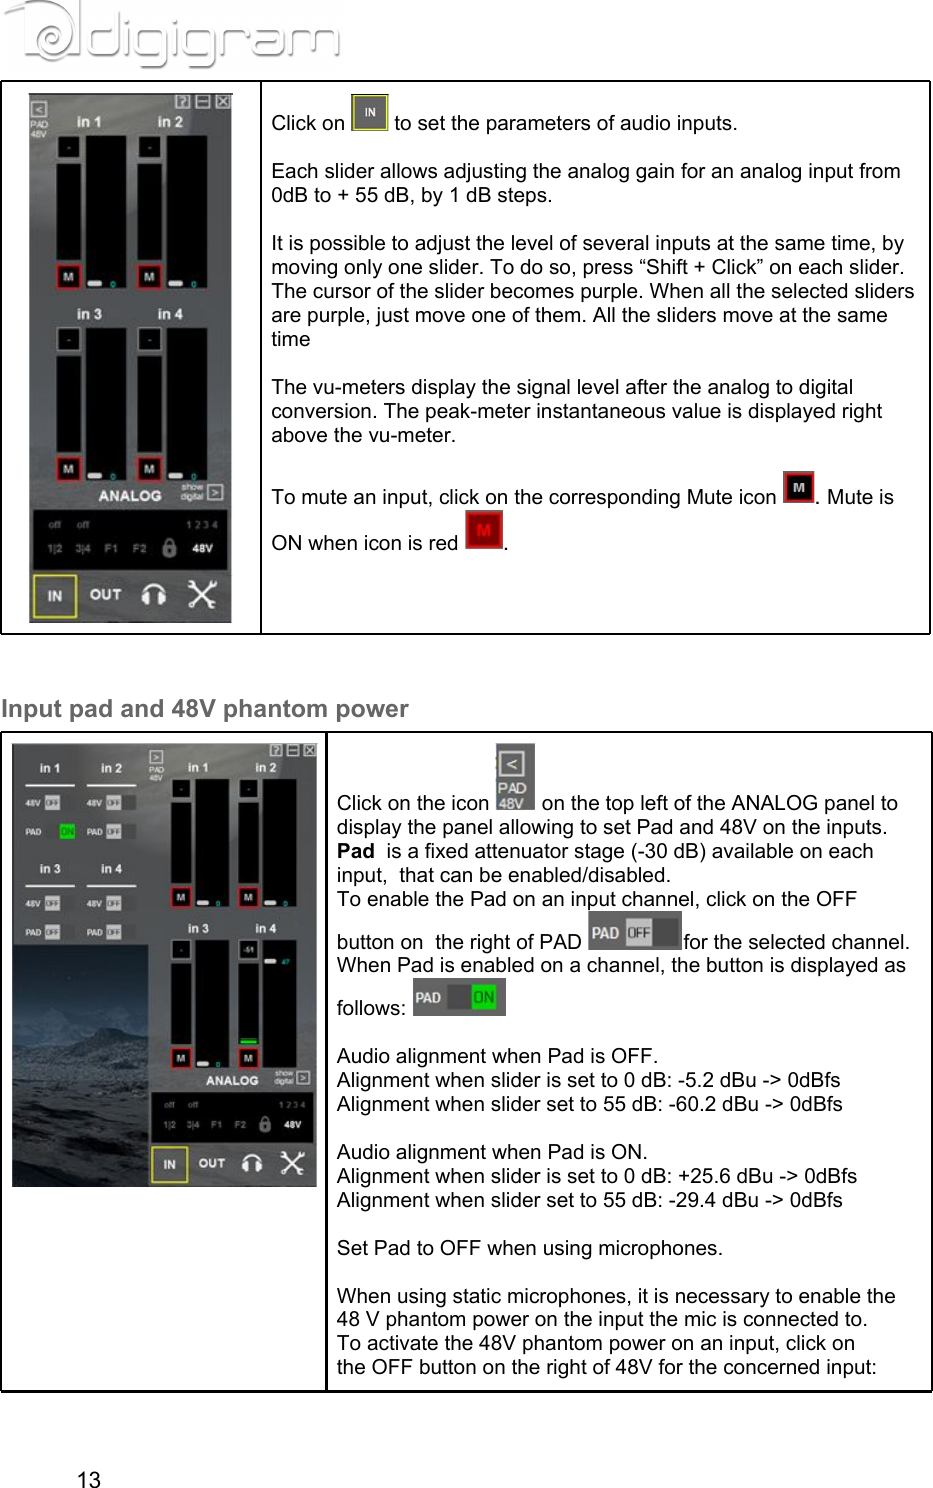 Click on   to set the parameters of audio inputs.  Each slider allows adjusting the analog gain for an analog input from 0dB to + 55 dB, by 1 dB steps.  It is possible to adjust the level of several inputs at the same time, by moving only one slider. To do so, press “Shift + Click” on each slider. The cursor of the slider becomes purple. When all the selected sliders are purple, just move one of them. All the sliders move at the same time  The vu-meters display the signal level after the analog to digital conversion. The peak-meter instantaneous value is displayed right above the vu-meter.  To mute an input, click on the corresponding Mute icon  . Mute is ON when icon is red  .  Input pad and 48V phantom powerClick on the icon   on the top left of the ANALOG panel to display the panel allowing to set Pad and 48V on the inputs.Pad  is a fixed attenuator stage (-30 dB) available on each input,  that can be enabled/disabled.To enable the Pad on an input channel, click on the OFF button on  the right of PAD  for the selected channel.When Pad is enabled on a channel, the button is displayed as follows:     Audio alignment when Pad is OFF.Alignment when slider is set to 0 dB: -5.2 dBu -&gt; 0dBfsAlignment when slider set to 55 dB: -60.2 dBu -&gt; 0dBfs  Audio alignment when Pad is ON.Alignment when slider is set to 0 dB: +25.6 dBu -&gt; 0dBfsAlignment when slider set to 55 dB: -29.4 dBu -&gt; 0dBfs  Set Pad to OFF when using microphones.  When using static microphones, it is necessary to enable the 48 V phantom power on the input the mic is connected to.To activate the 48V phantom power on an input, click on the OFF button on the right of 48V for the concerned input: 13